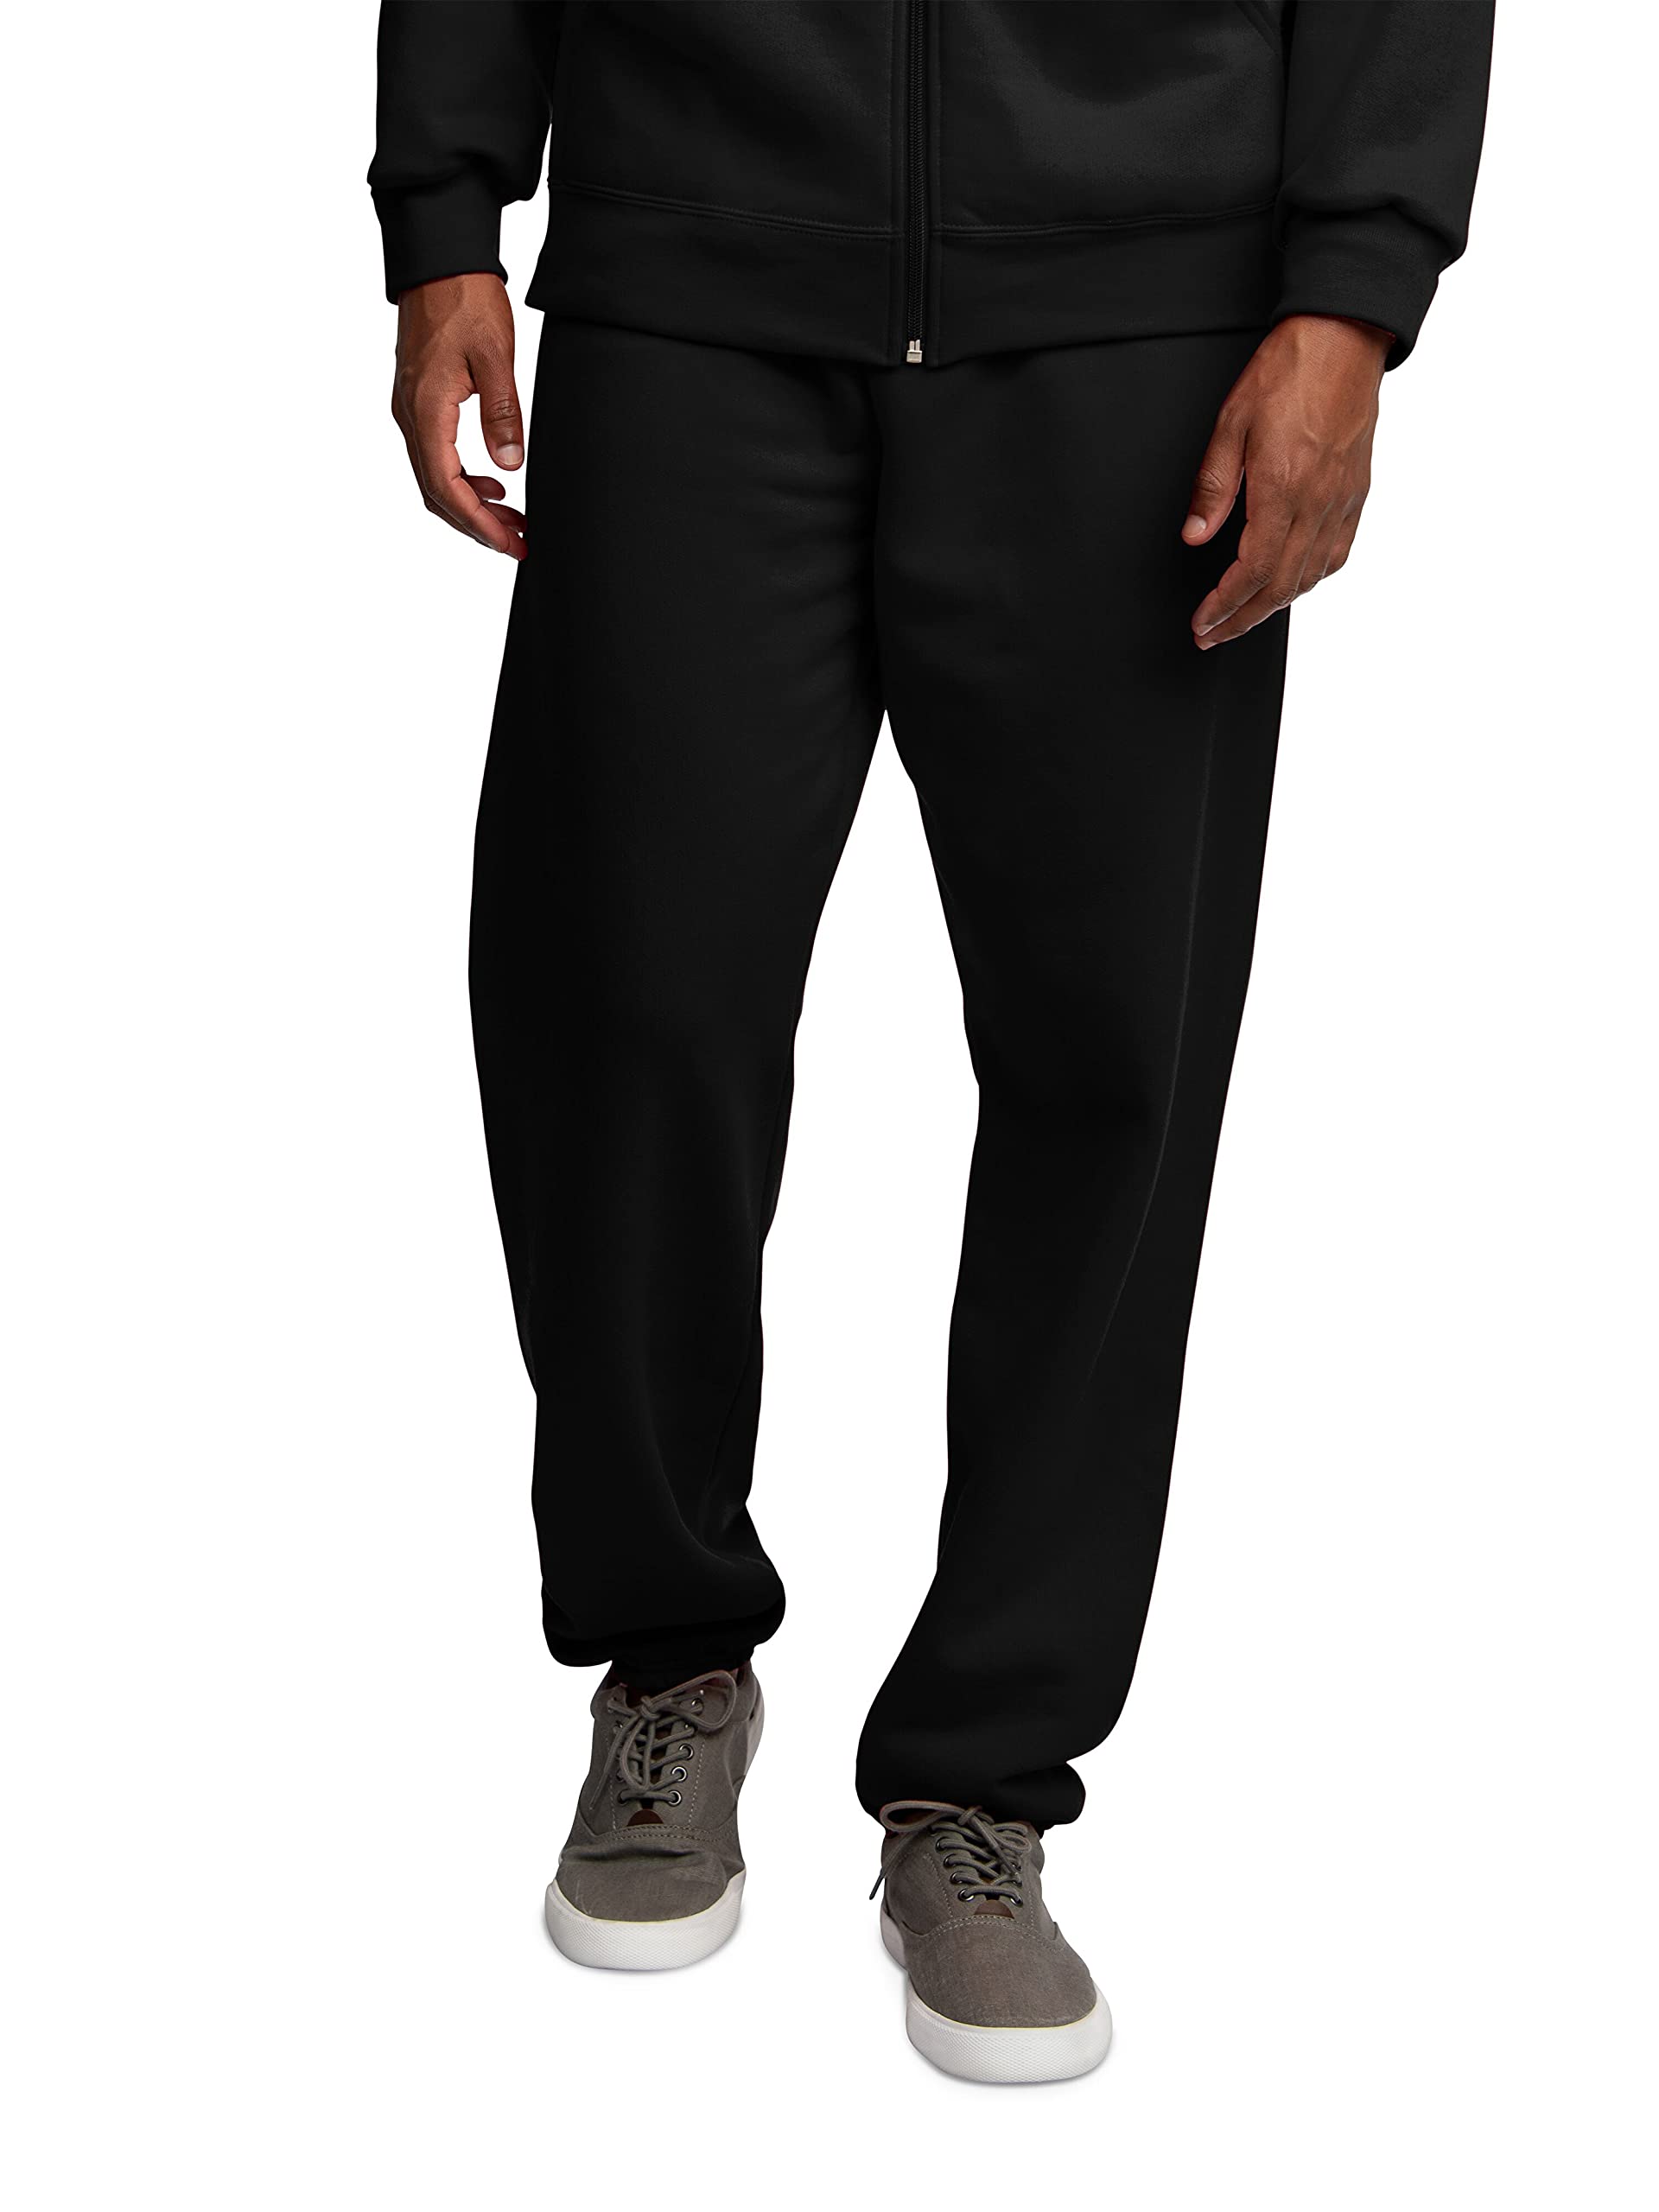 Fruit of the Loom Eversoft Fleece Sweatpants & Joggers with Pockets, Moisture Wicking & Breathable, Sizes S-4X